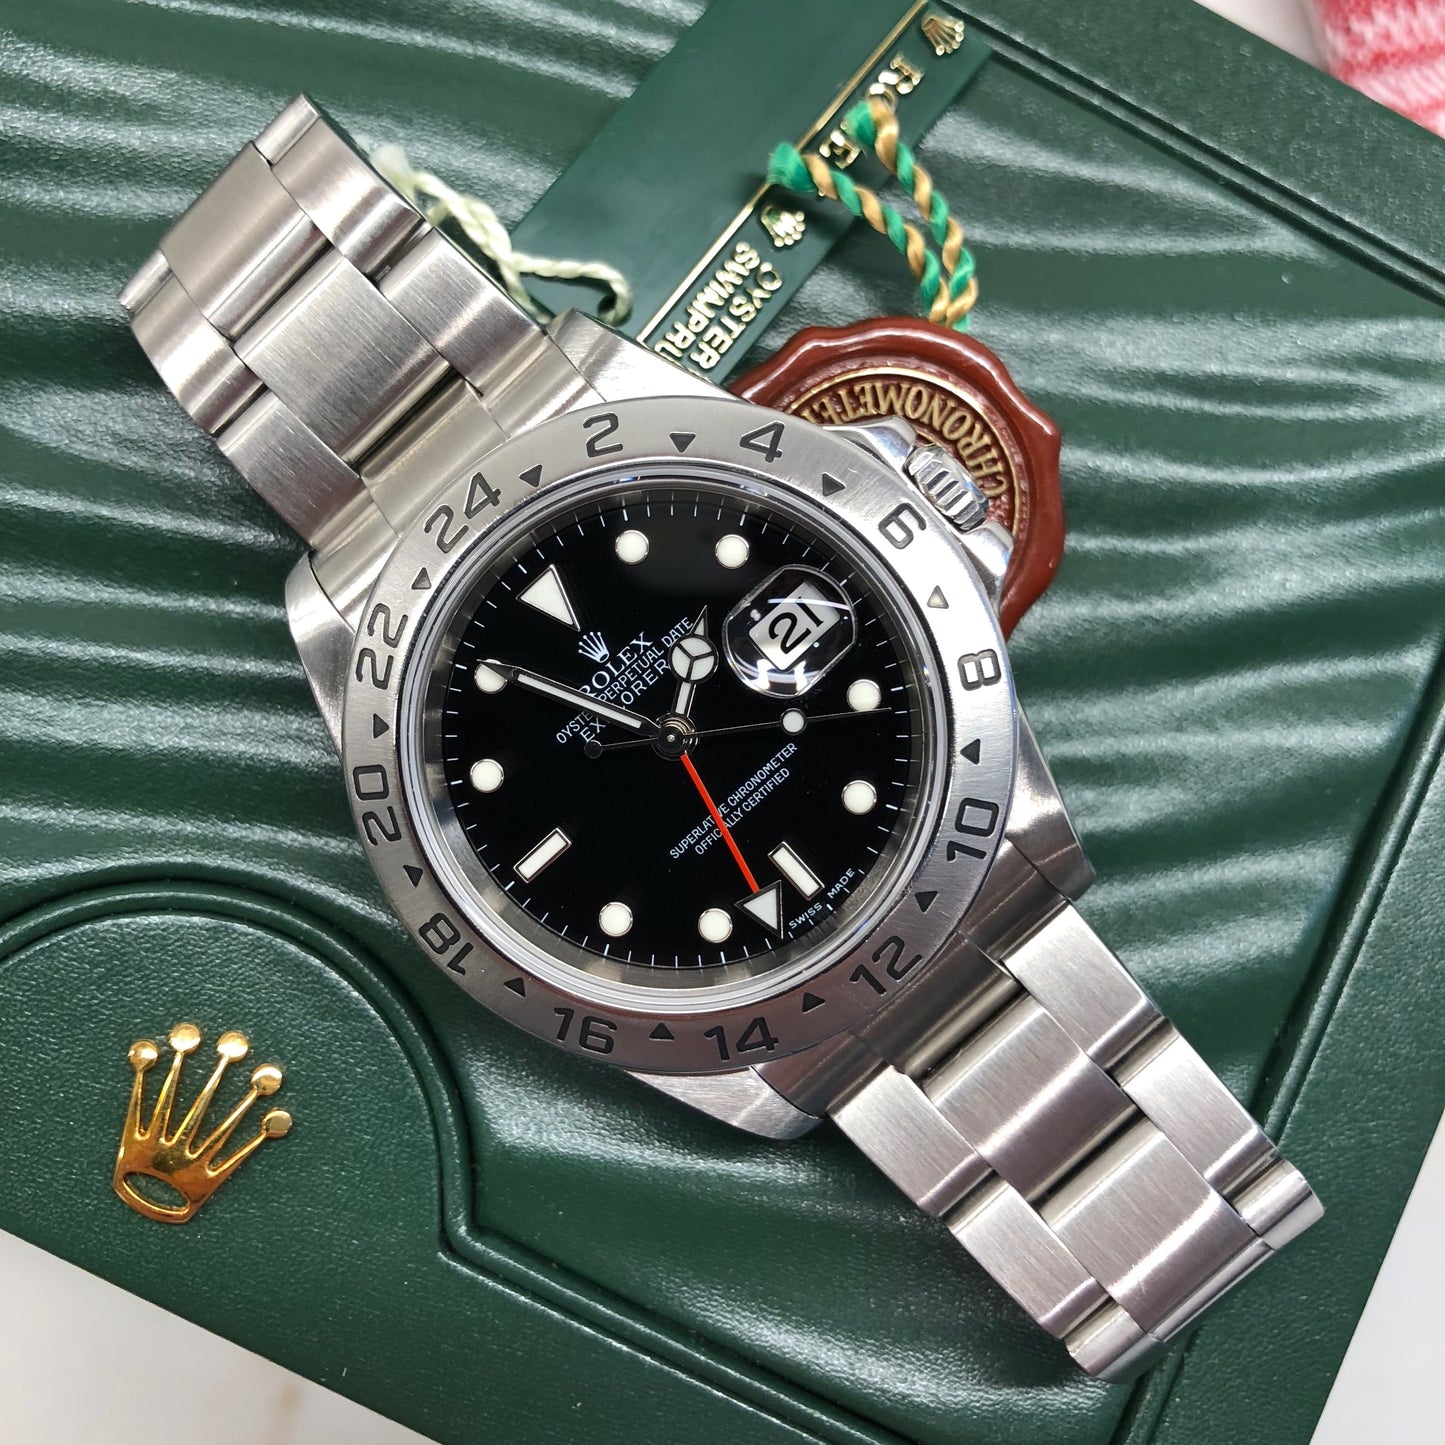 Rolex Explorer II 16570 Stainless Steel GMT Oyster F Serial Wristwatch Box Papers Circa 2003 - Hashtag Watch Company